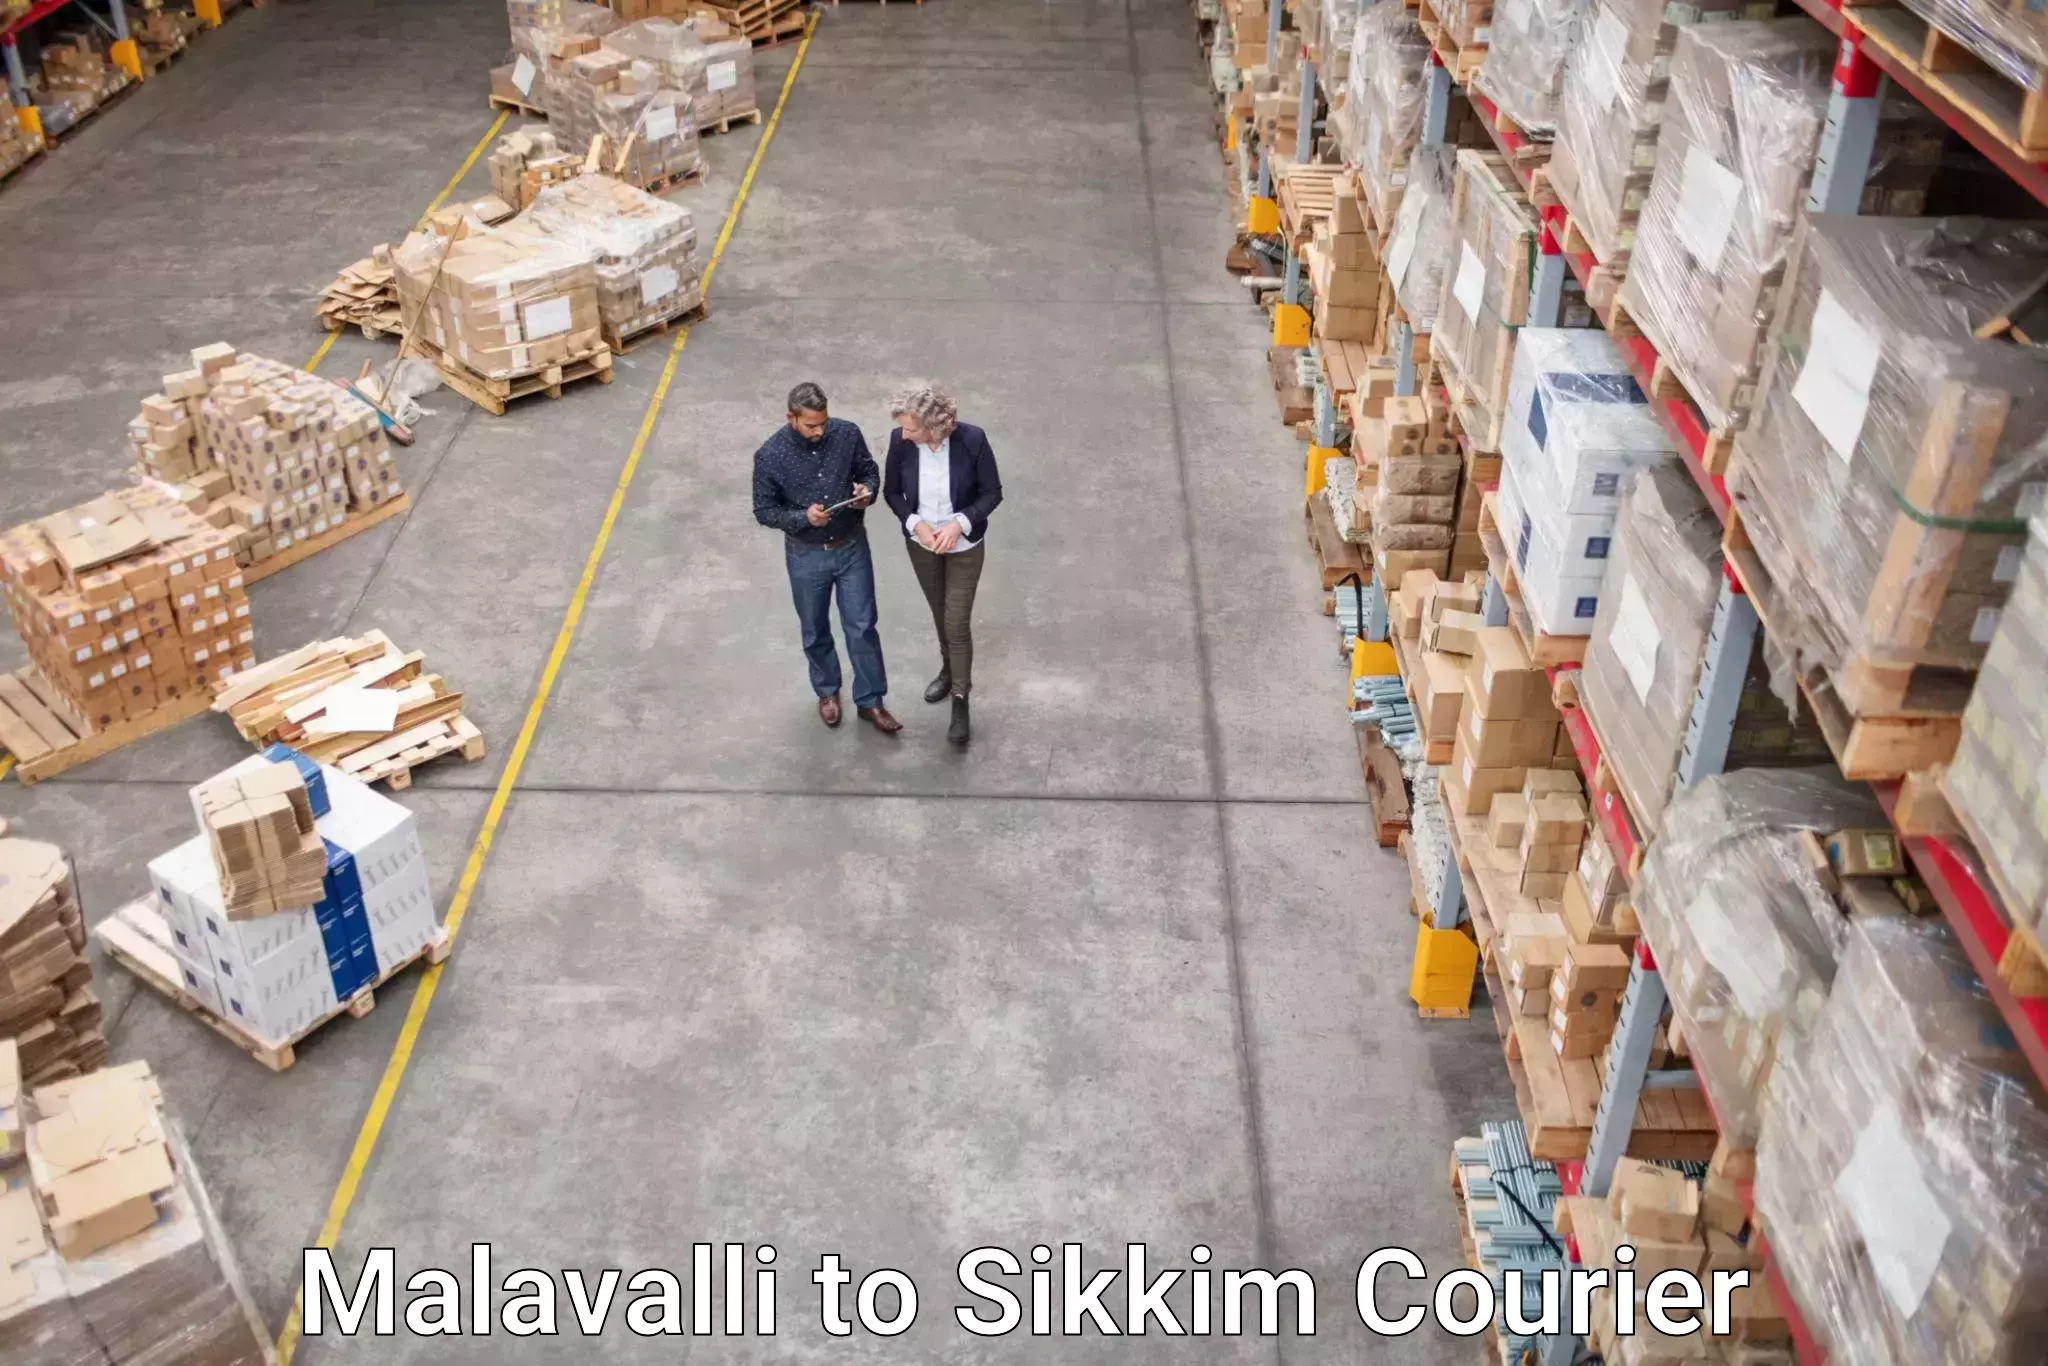 Courier app Malavalli to East Sikkim